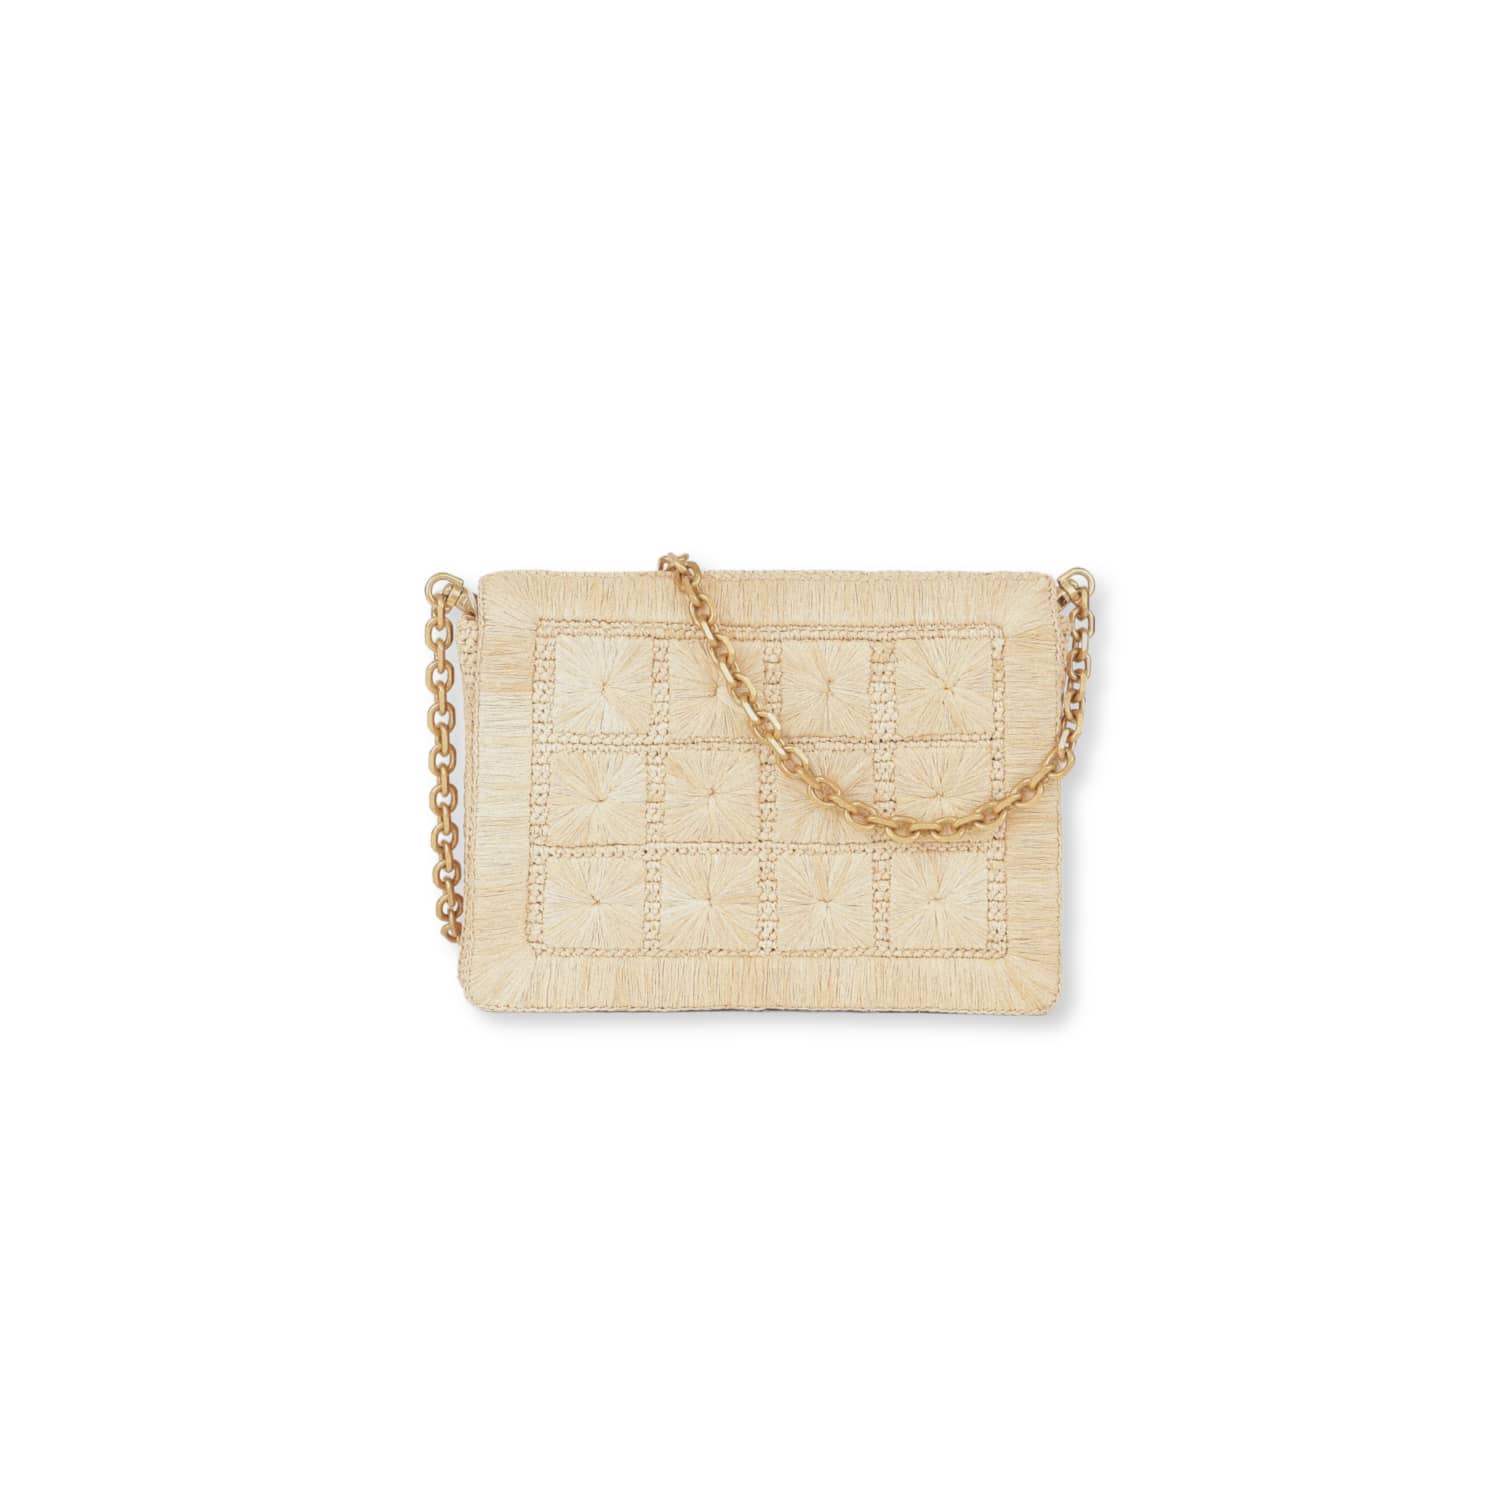 Embroidered & Crocheted Raffia Bag Juliette - Natural by SANABAY Paris